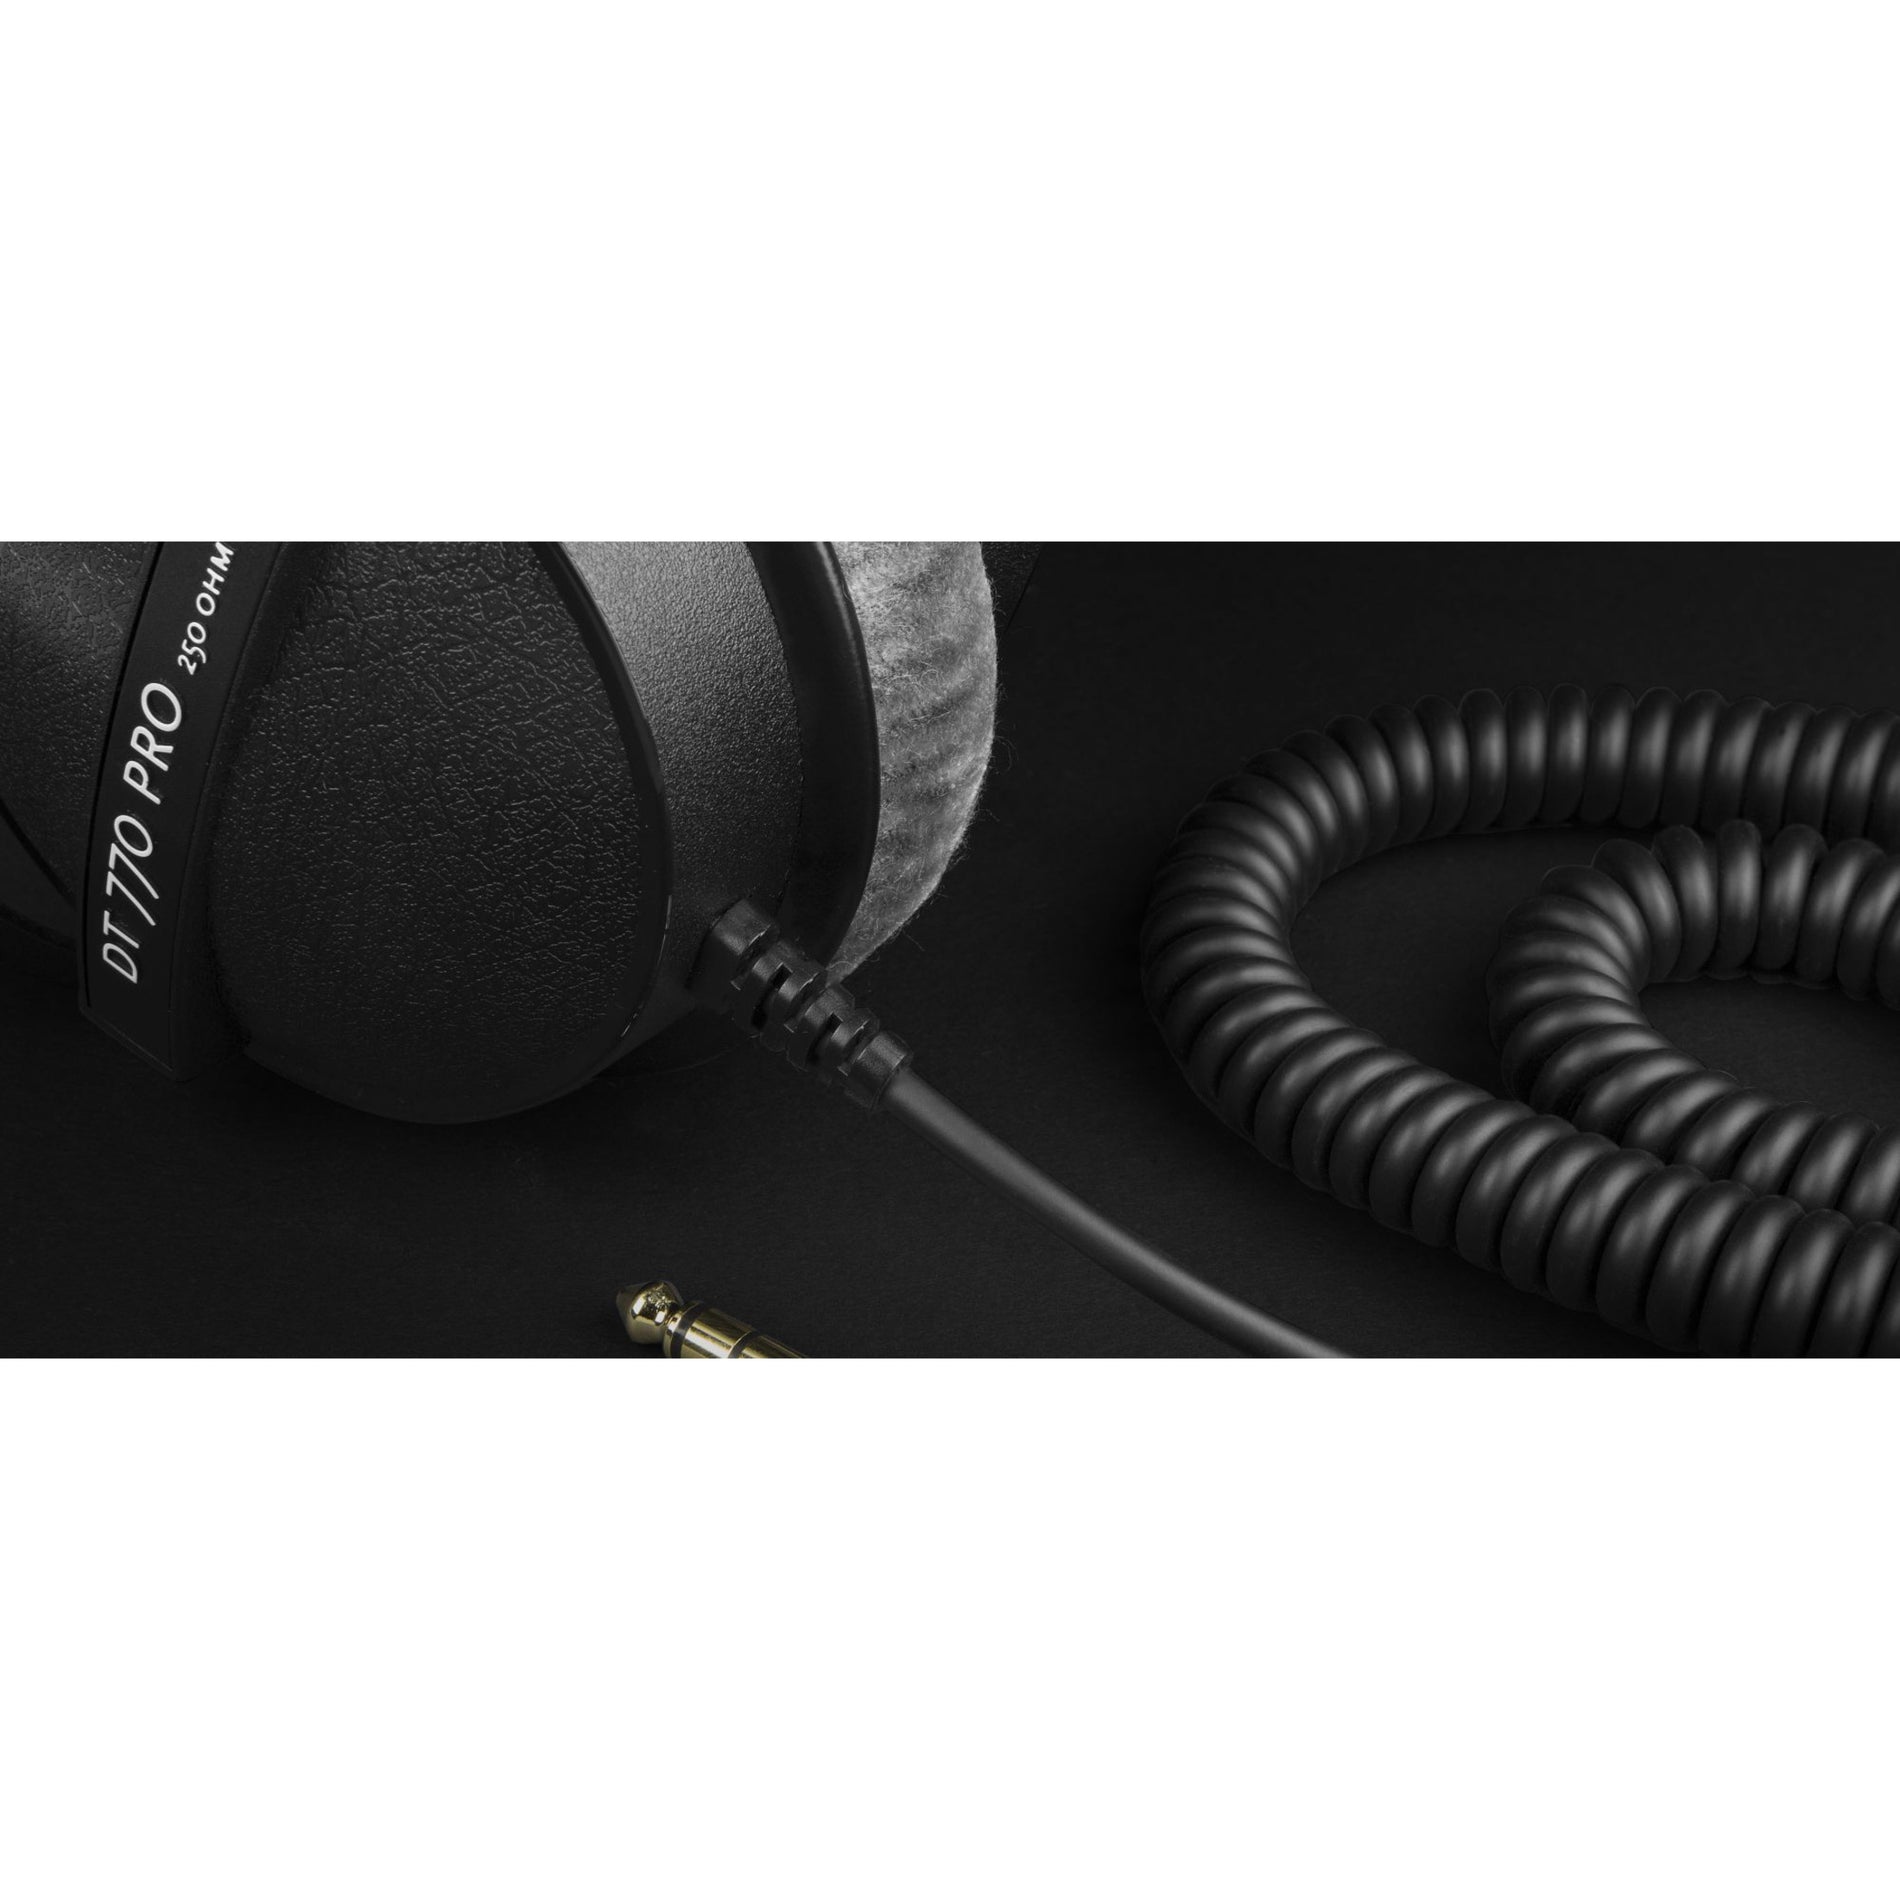 Beyerdynamic 474746 DT 770 PRO Dynamic Headphone, Over-the-head, 80 Ohm, Stereo, 9.84 ft Cable Length, Gold Plated Connector